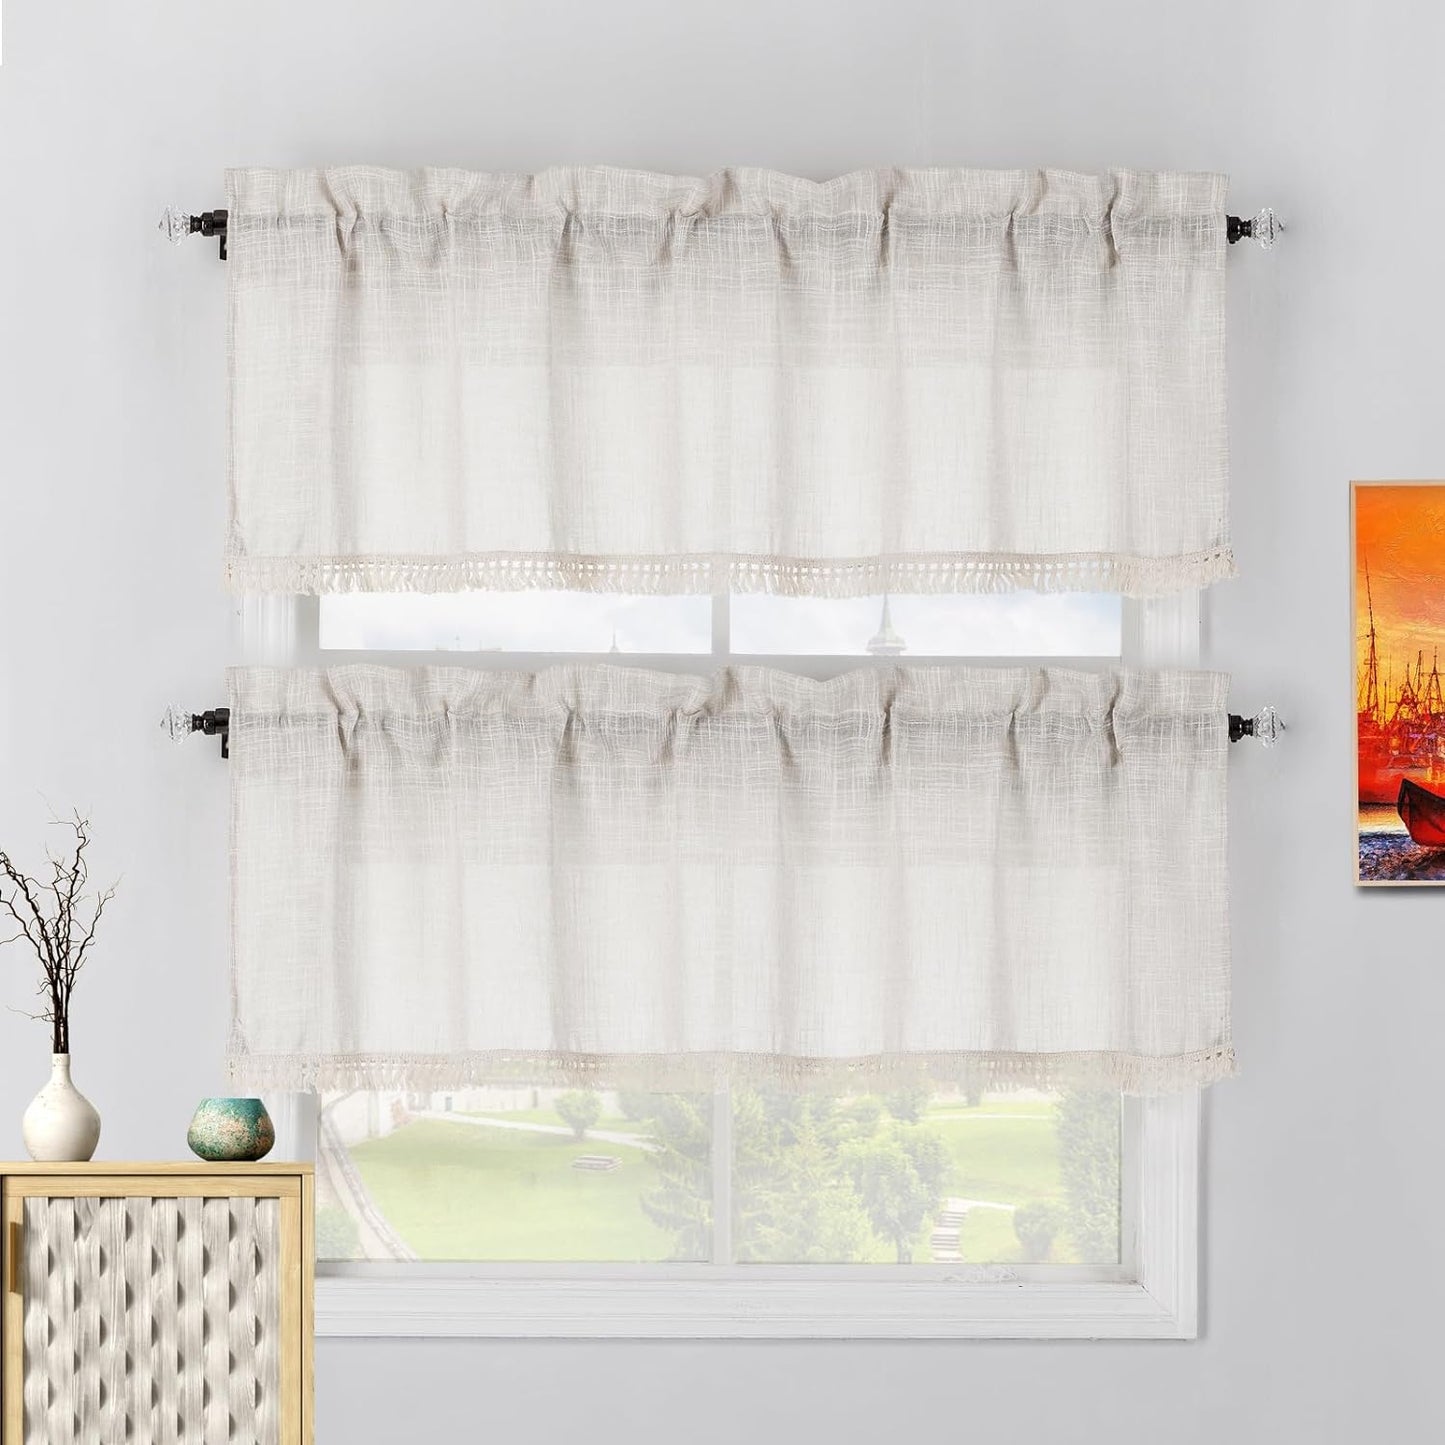 Beda Home Tassel Linen Textured Swag Curtain Valance for Farmhouses’ Kitchen; Light Filtering Rustic Short Swag Topper for Small Windows Bedroom Privacy Added Rod Pocket Design(Nature 36X63-2Pcs)  BD BEDA HOME Nature 52Wx18L - 2 Pcs 